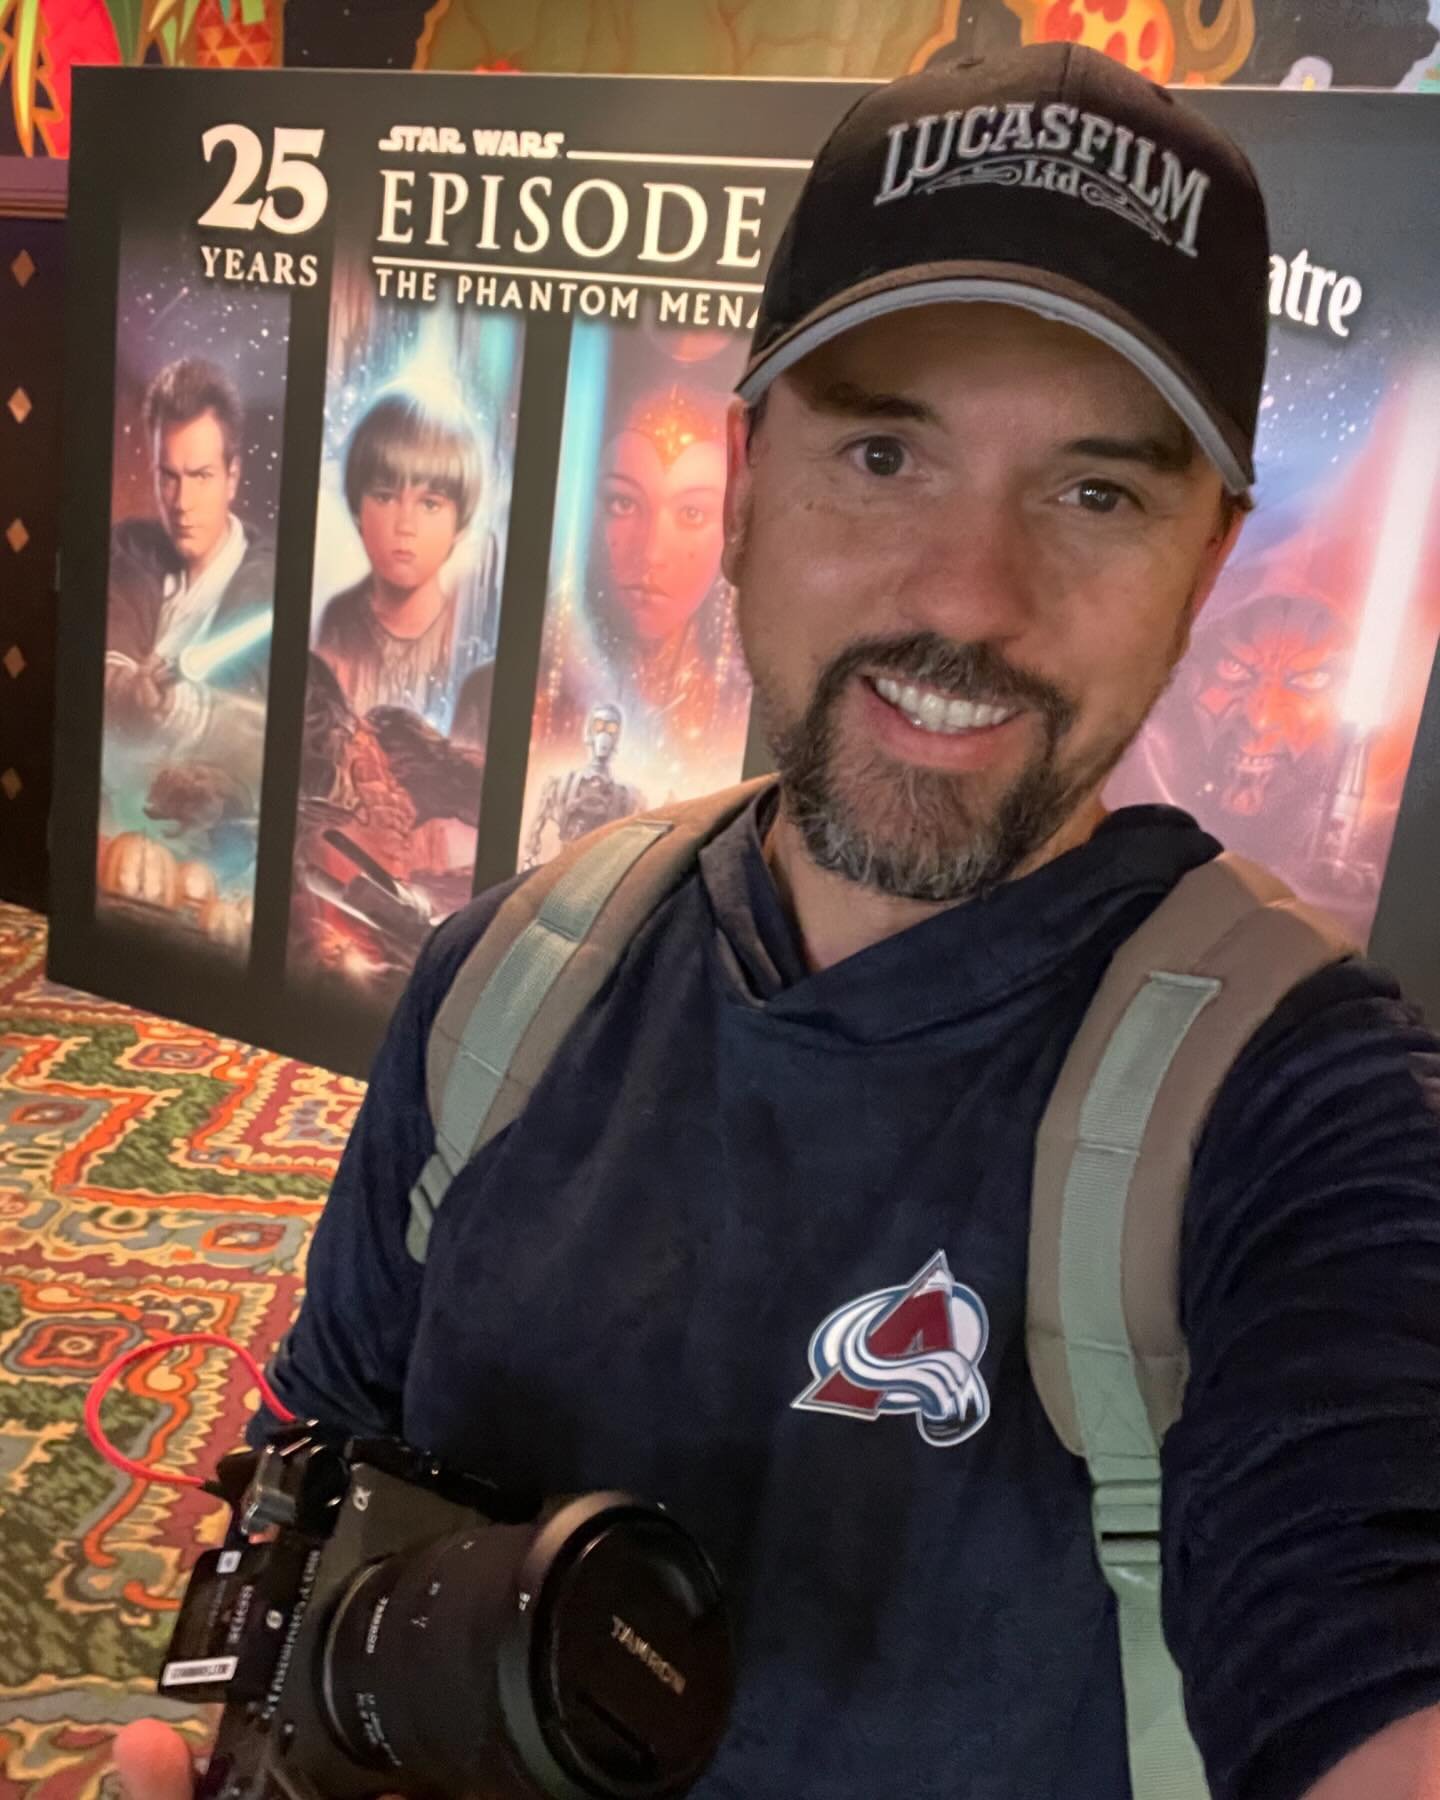 25 years to the day since dragging everyone in the Ford Aerostar to the Chinese Theater for a midnight screening, here I am working for Lucasfilm today at the 25th Anniversary Premiere. Wizard.